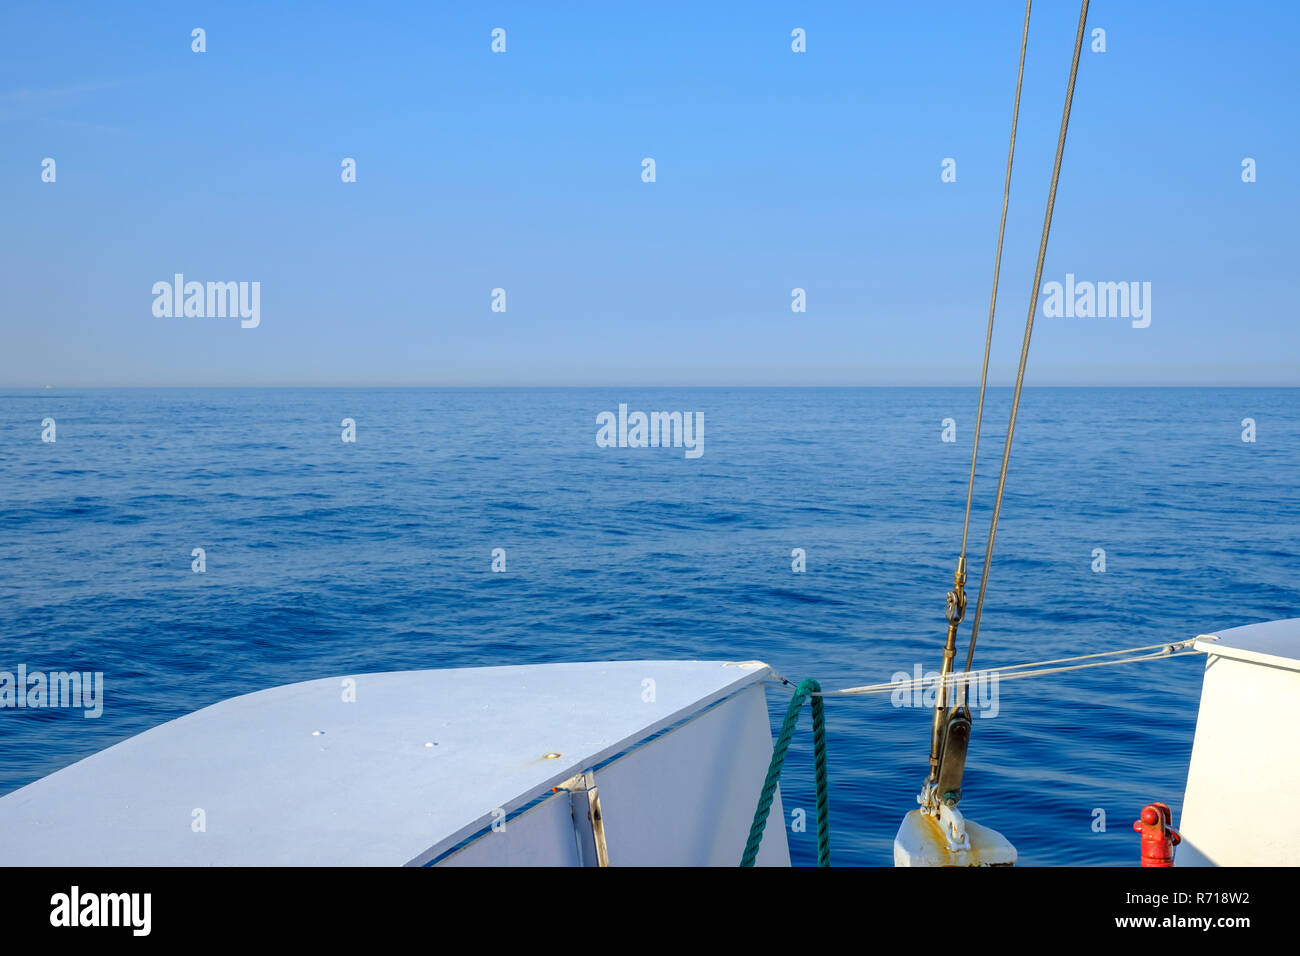 Maritime view from the bow of a ship to the open sea out to the horizon. Stock Photo